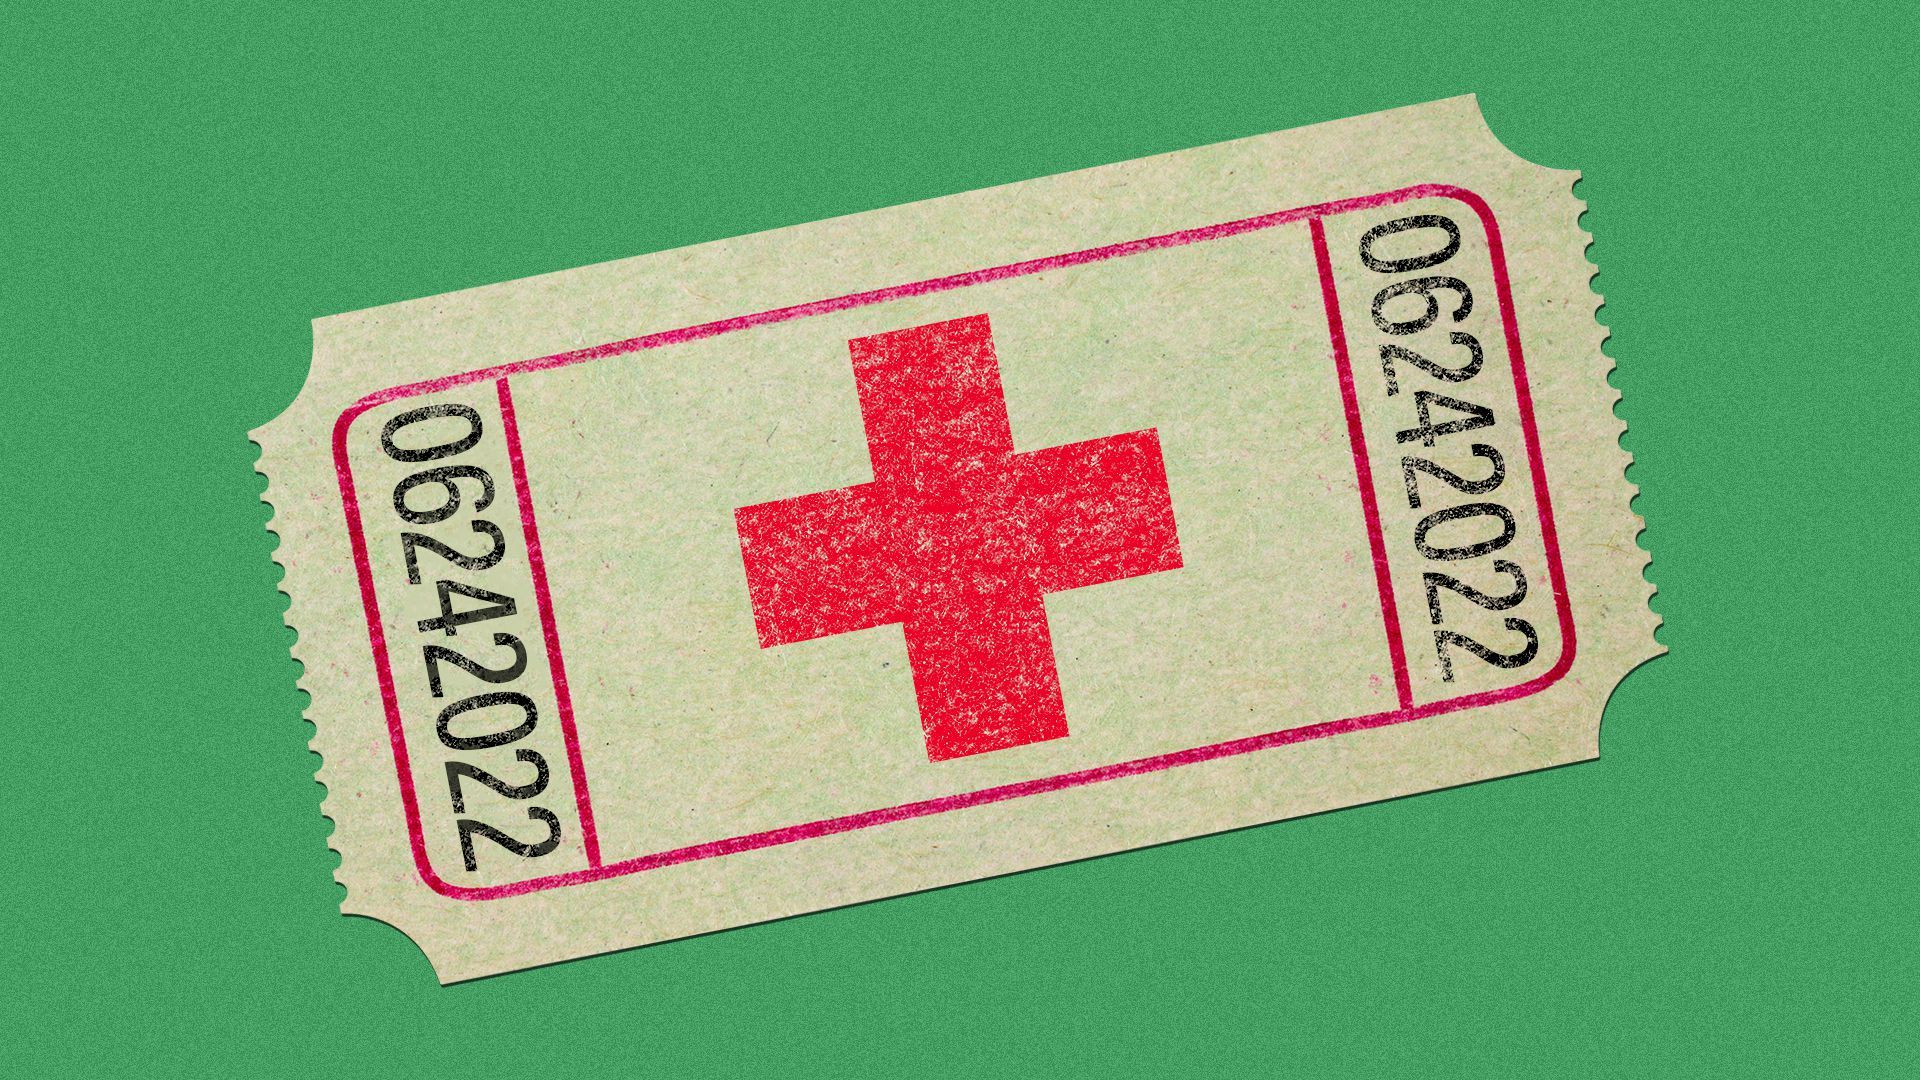 Illustration of a red cross on a ticket.